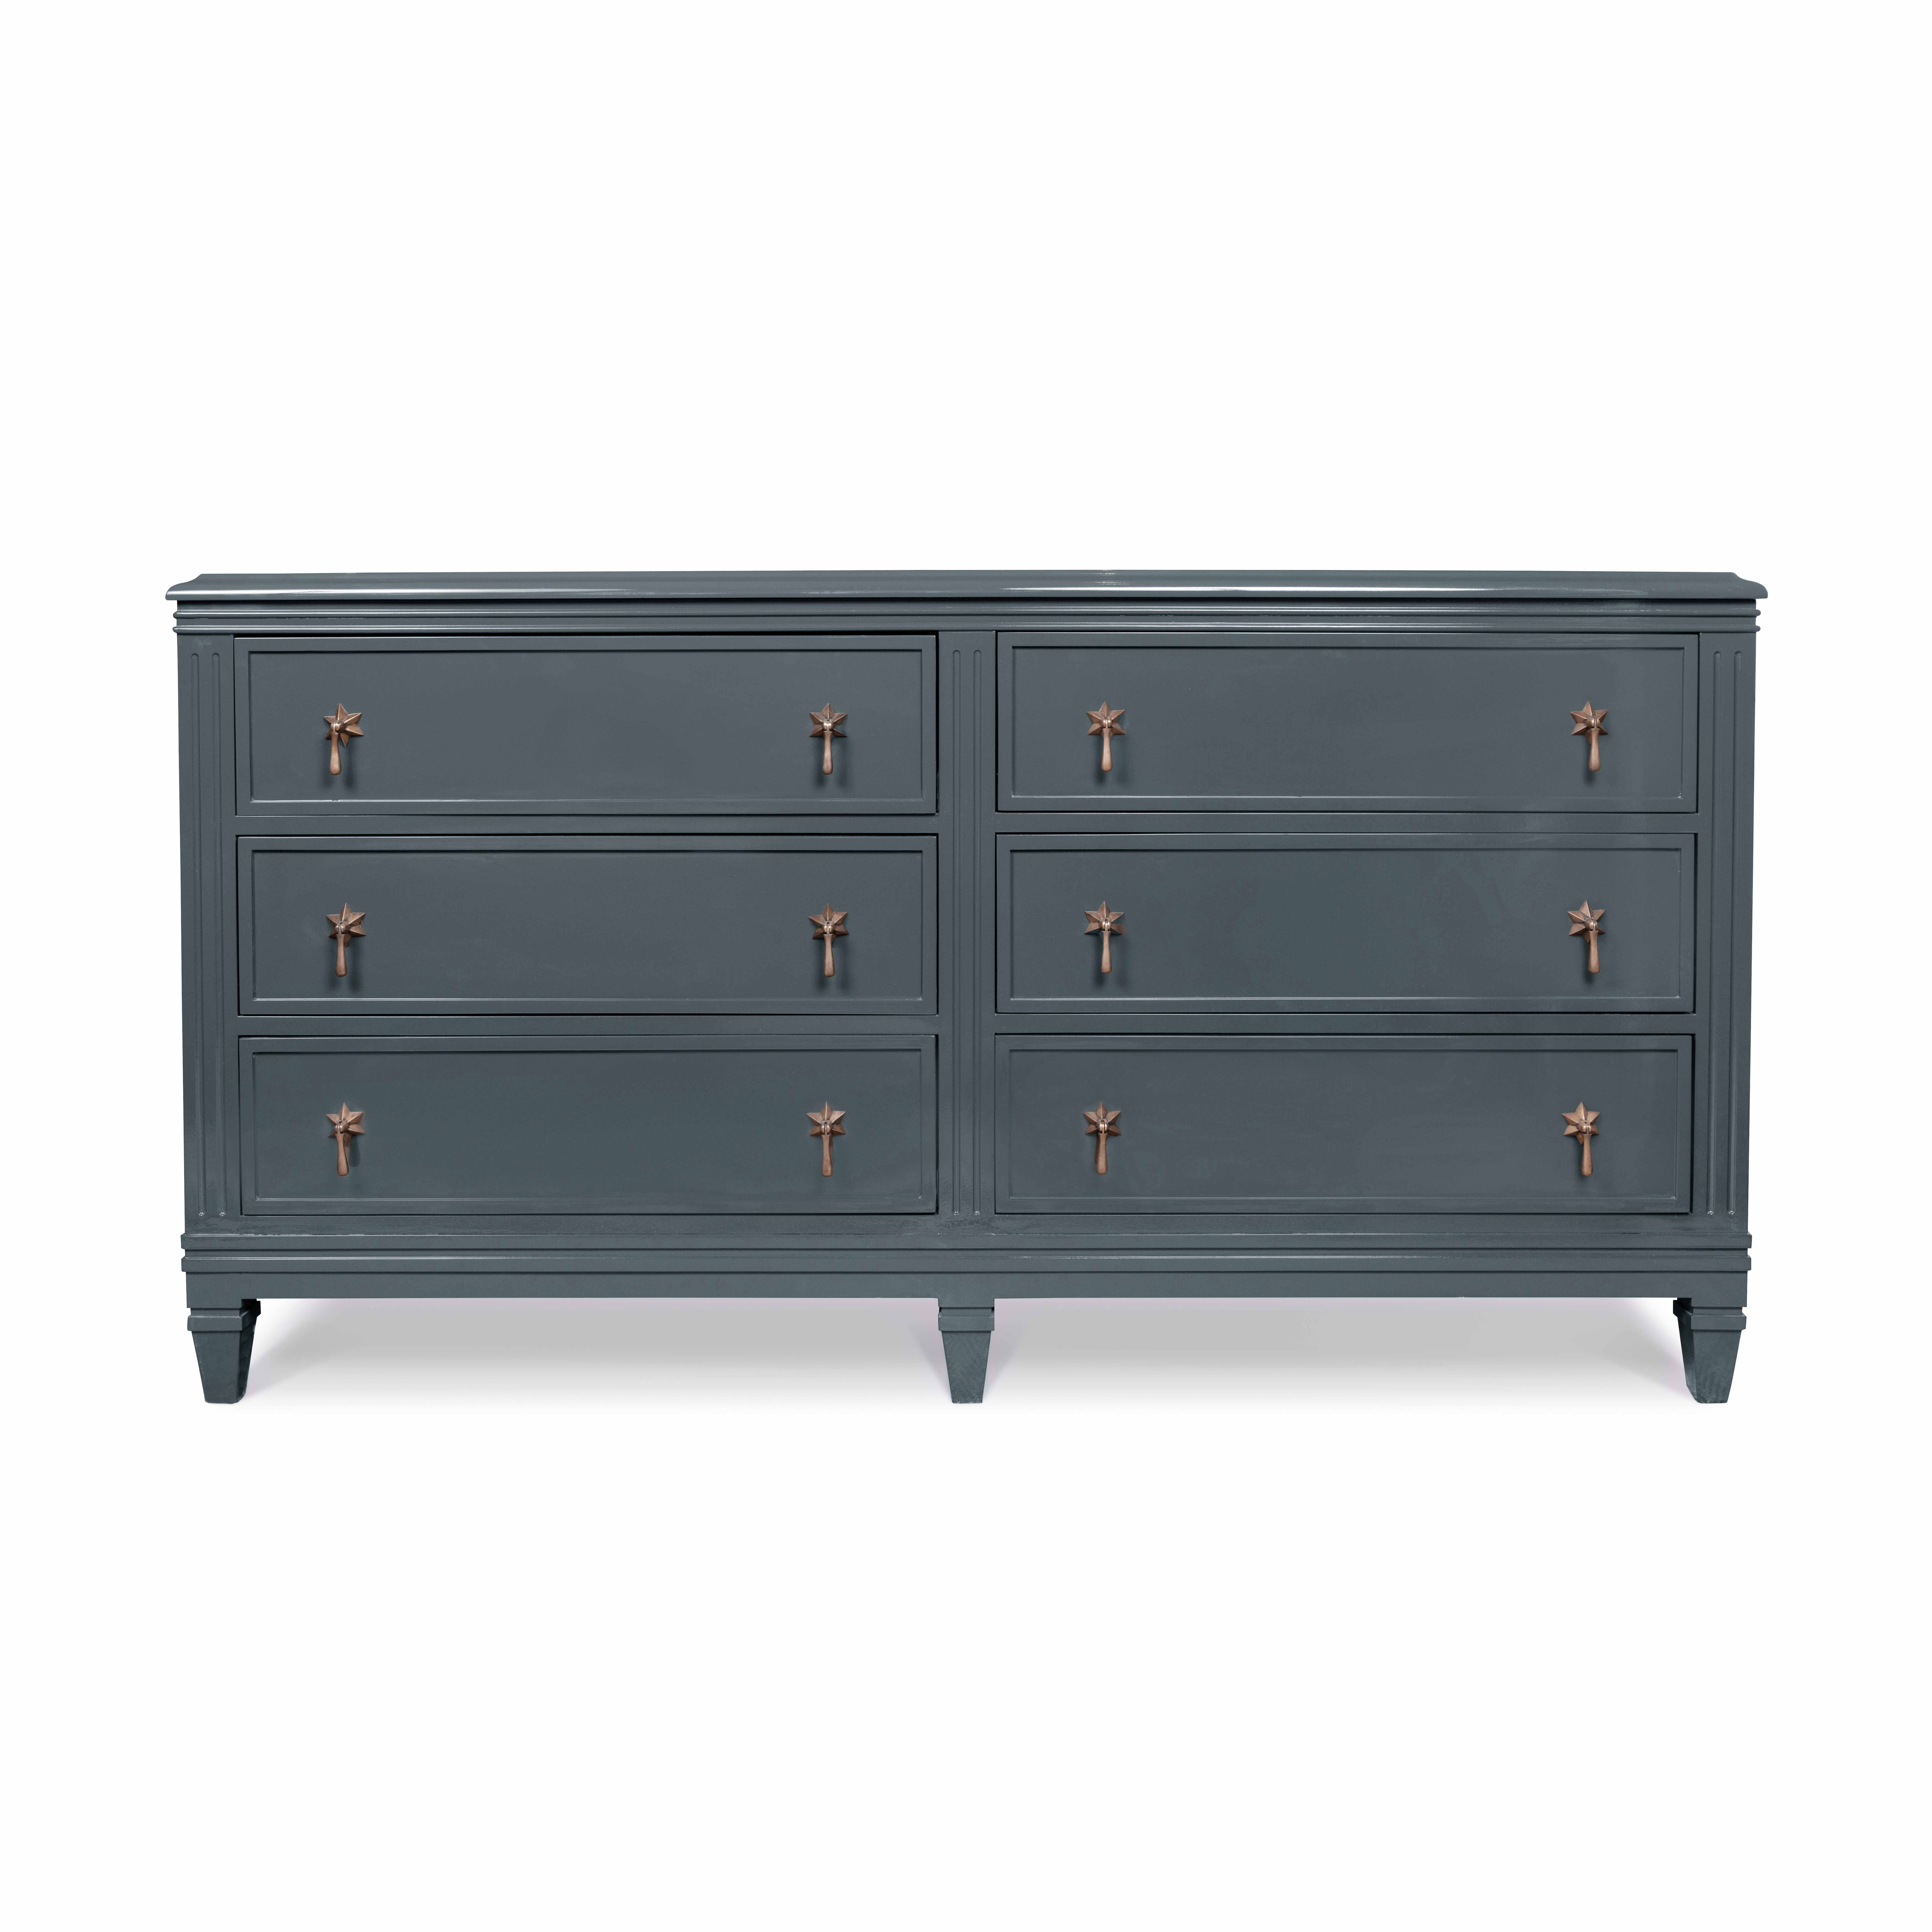 A teal-coloured large double chest of drawers with six drawers, each with two star-shaped pull handles.